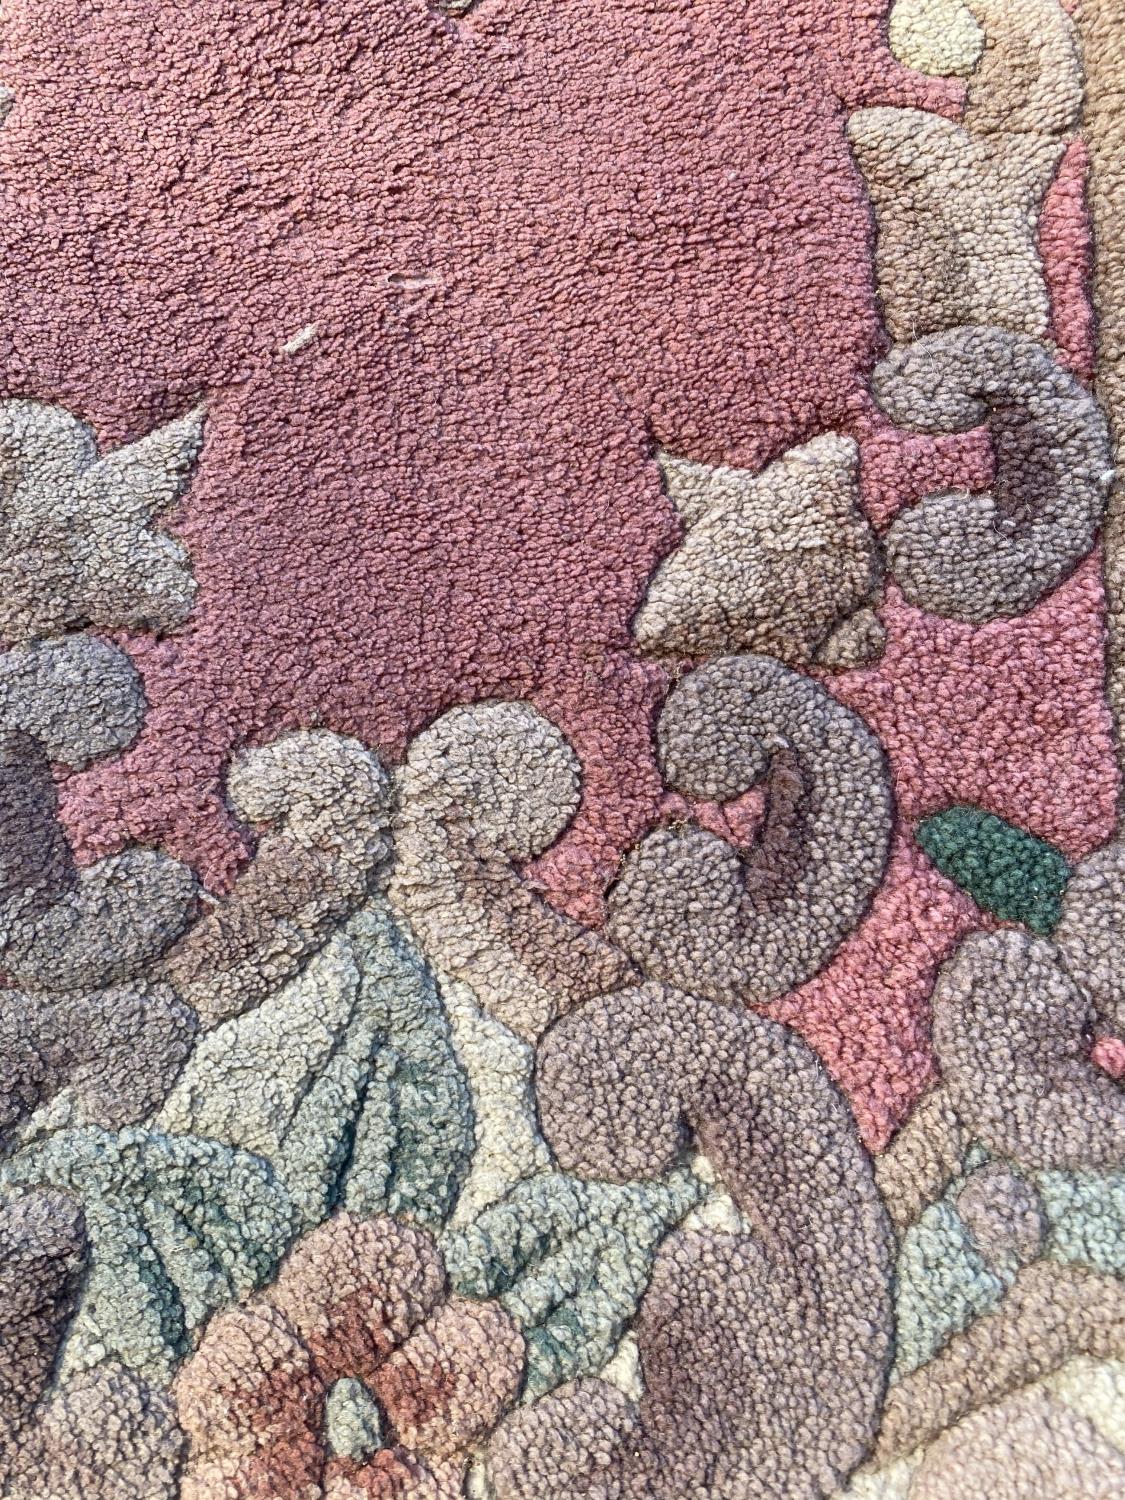 A PINK PATTERNED RUG (1480X750) - Image 3 of 3